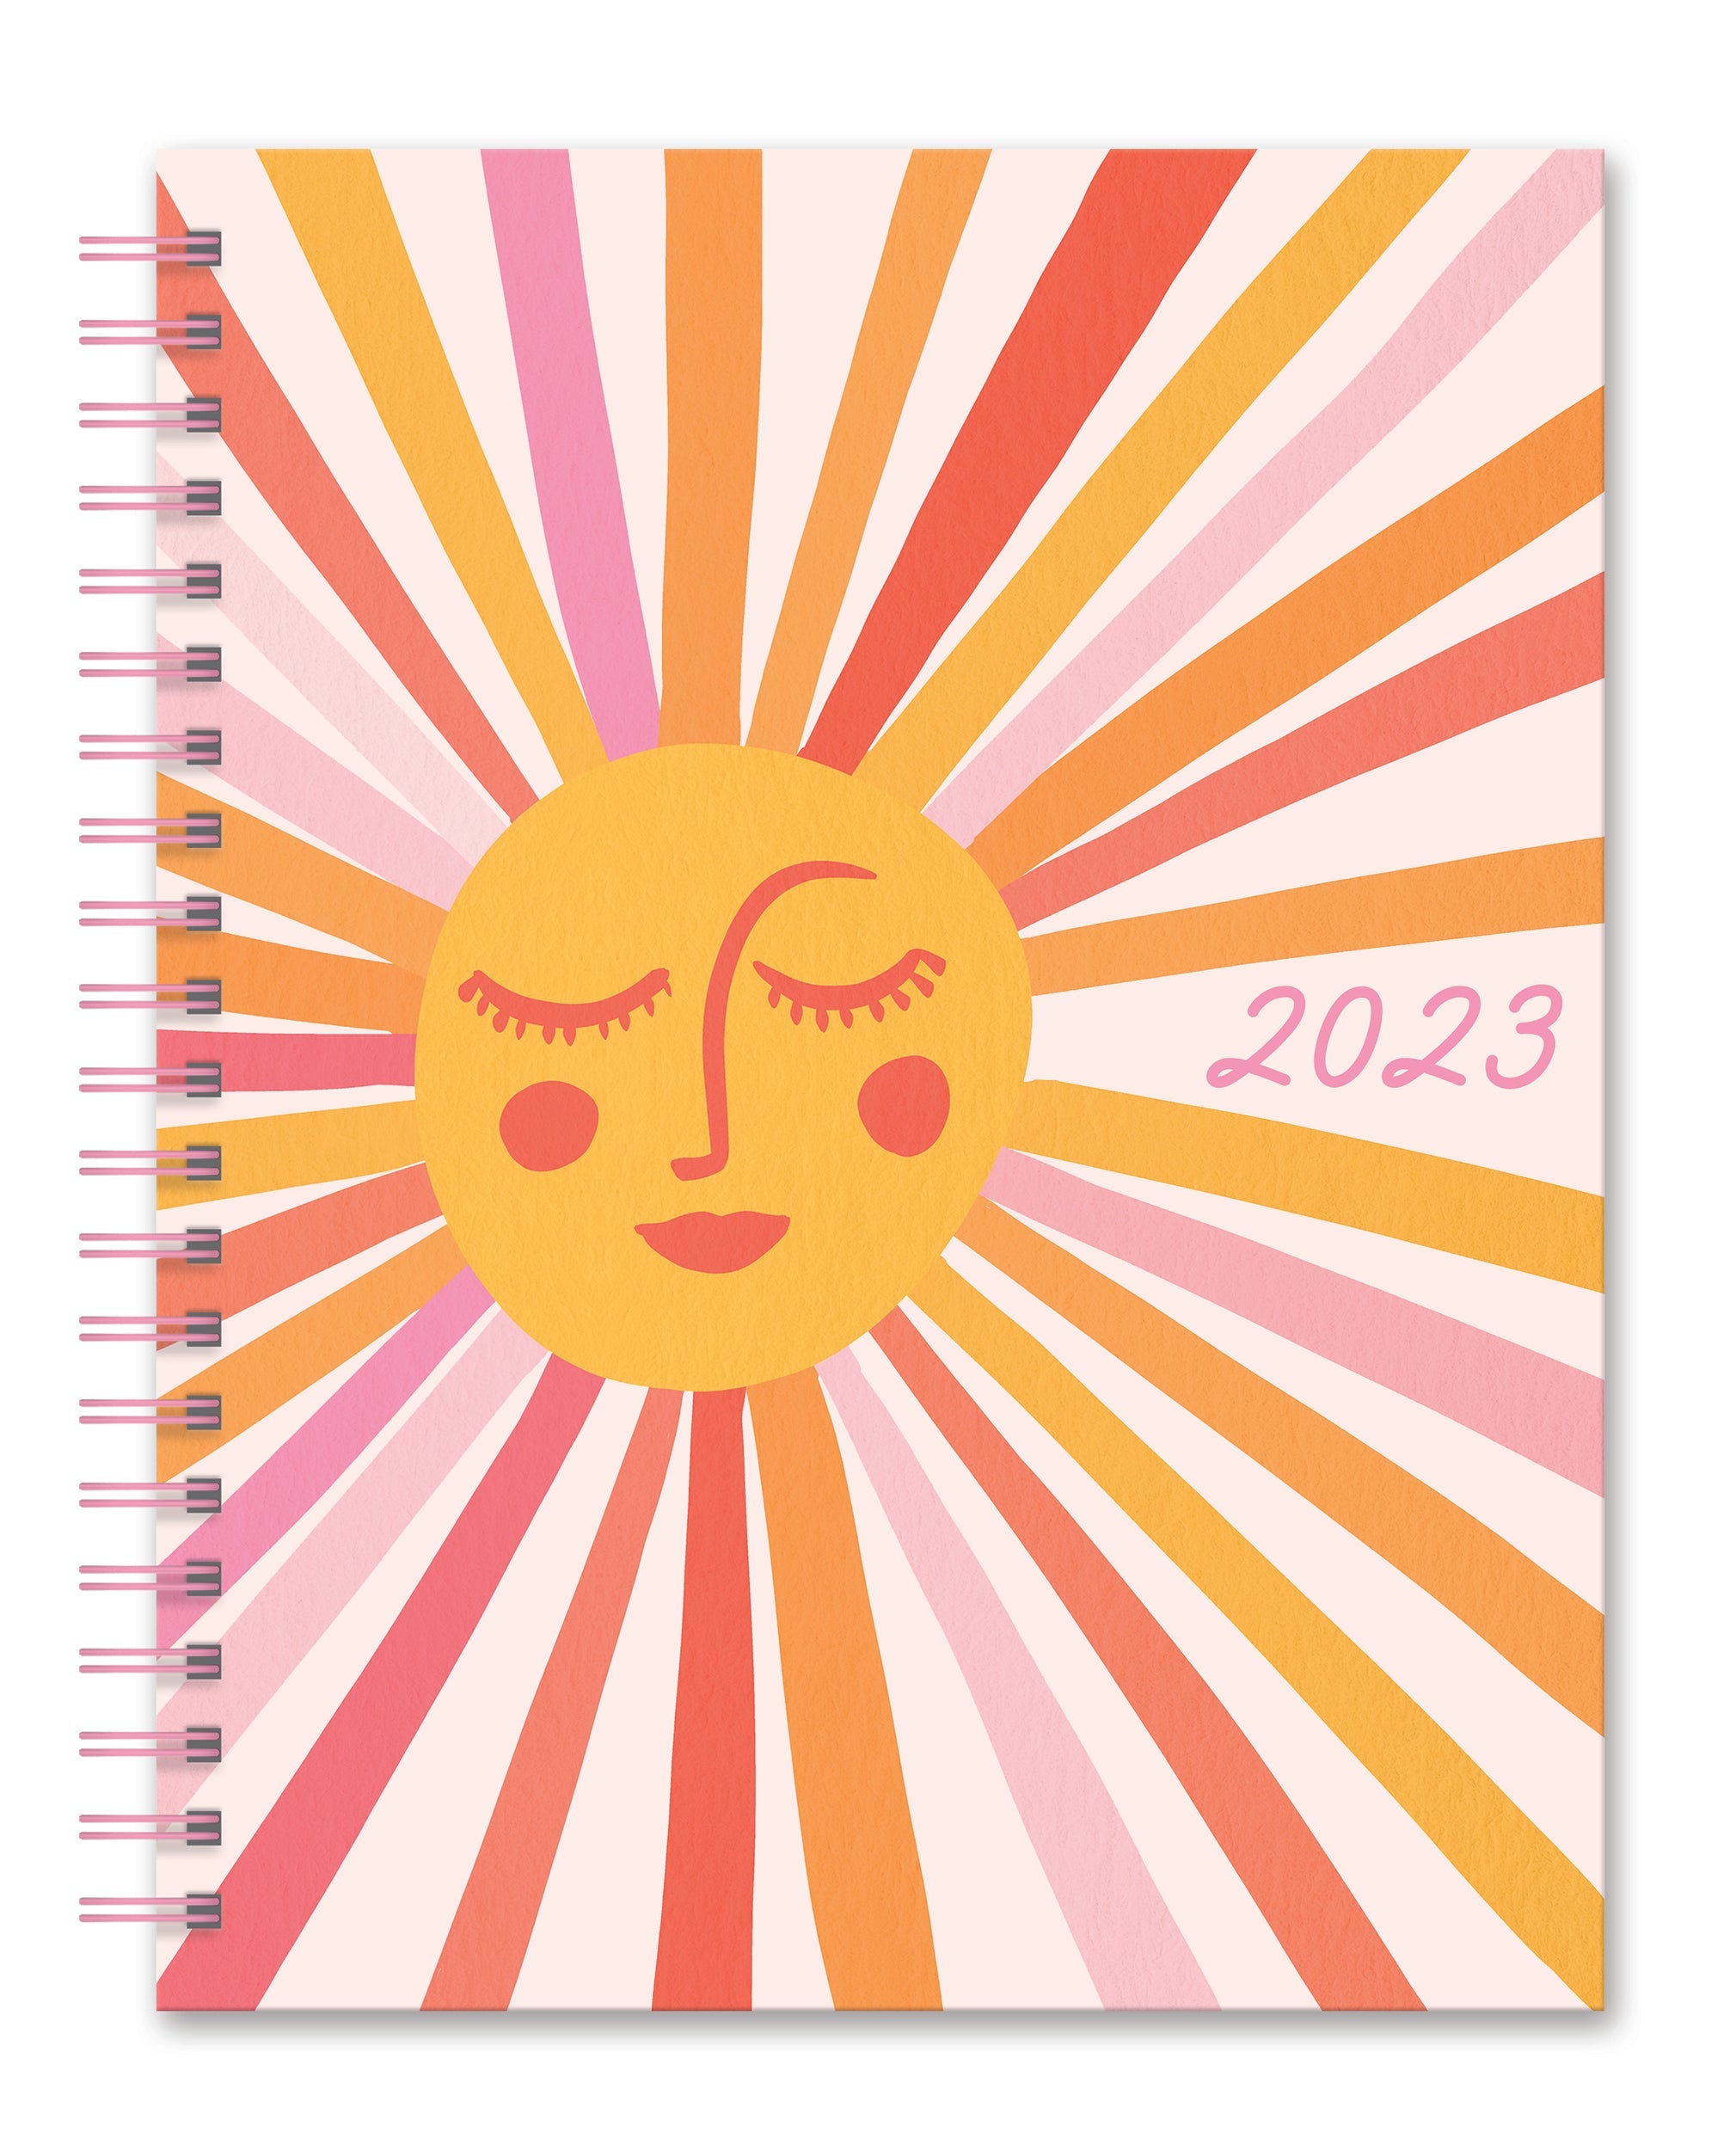 2023 Retro Sunshine by CatCoq (XL Spiral Weekly/Monthly Planner) - Diary/Planner